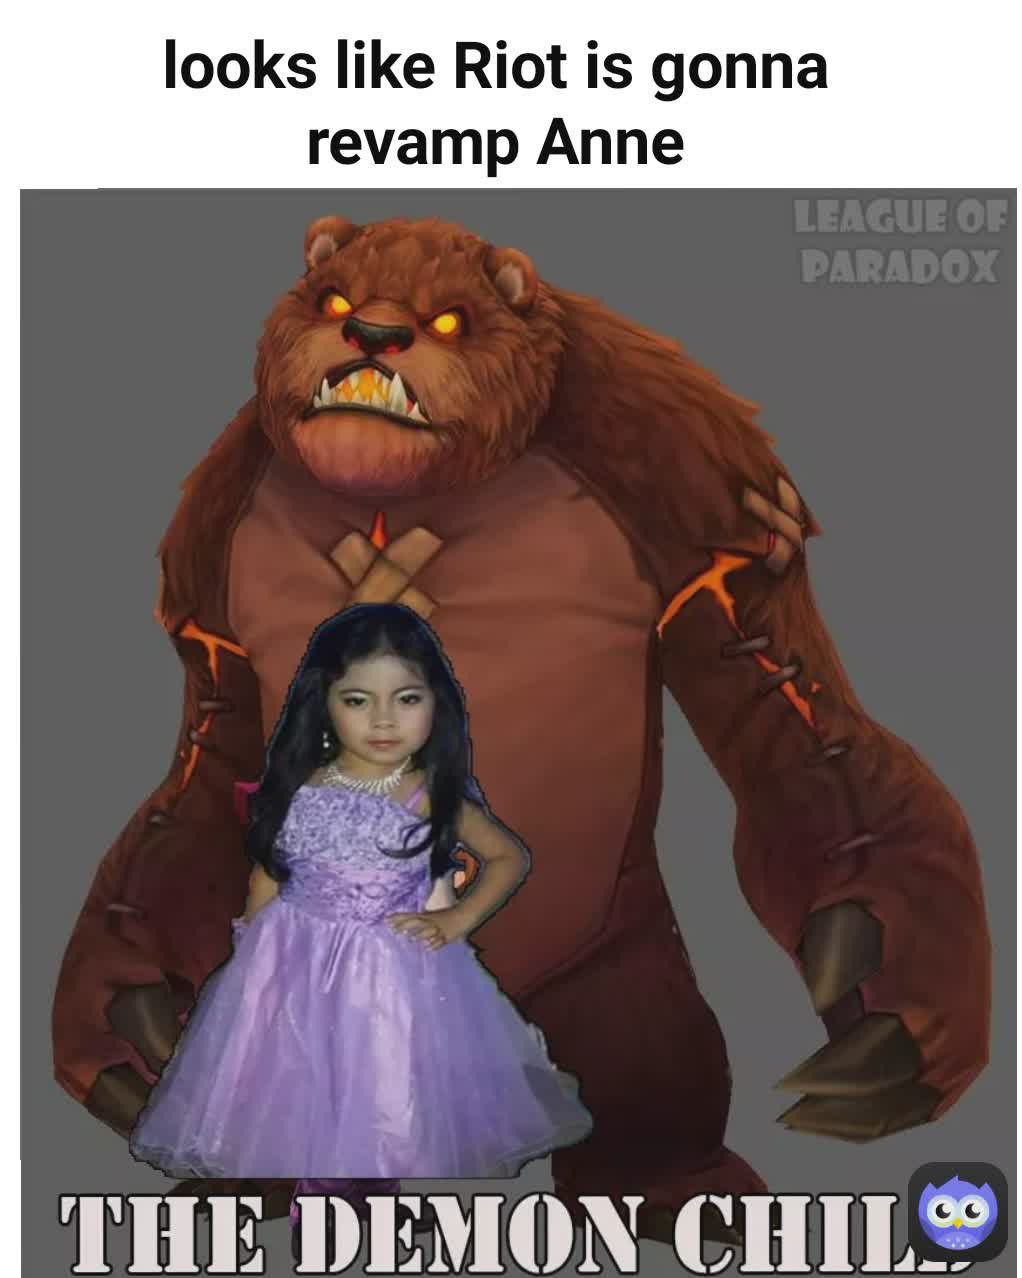 looks like Riot is gonna revamp Anne